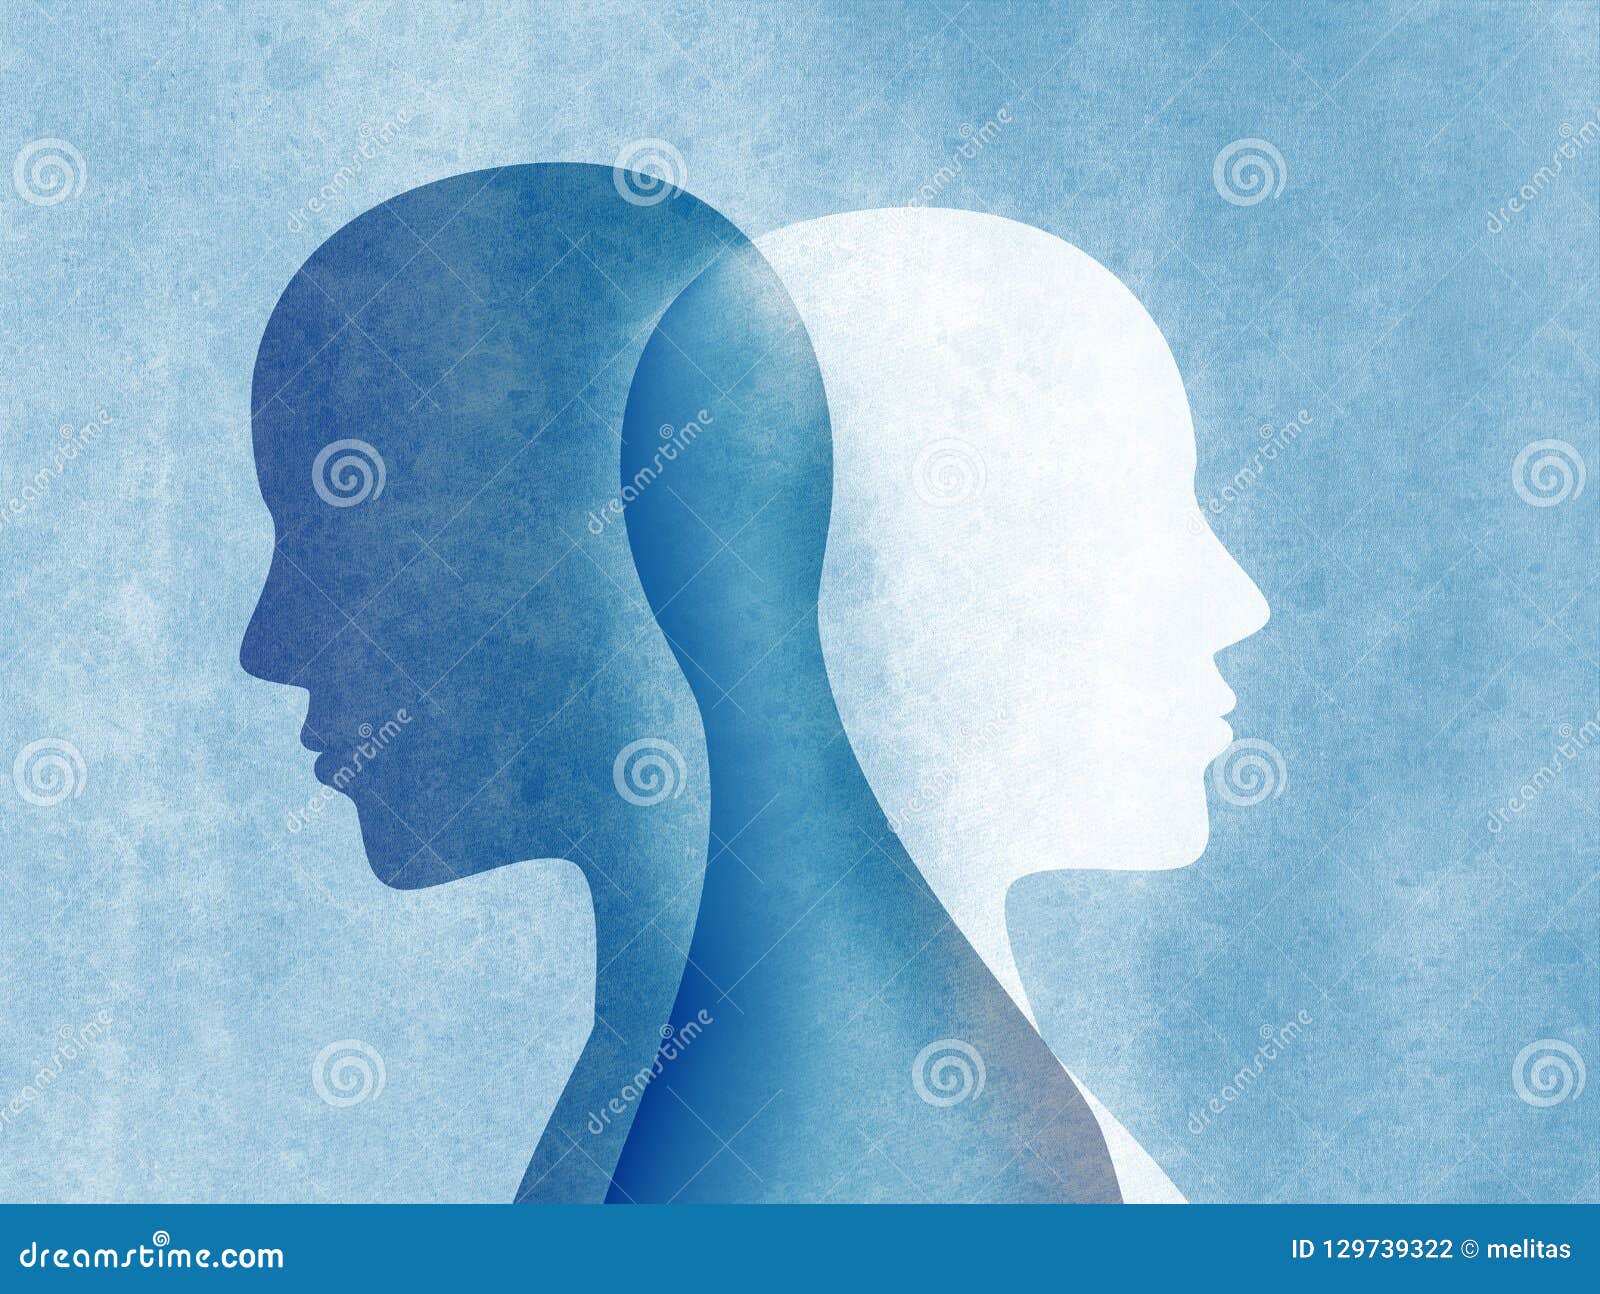 bipolar disorder mind mental. split personality. mood disorder. dual personality concept. silhouette on blue background